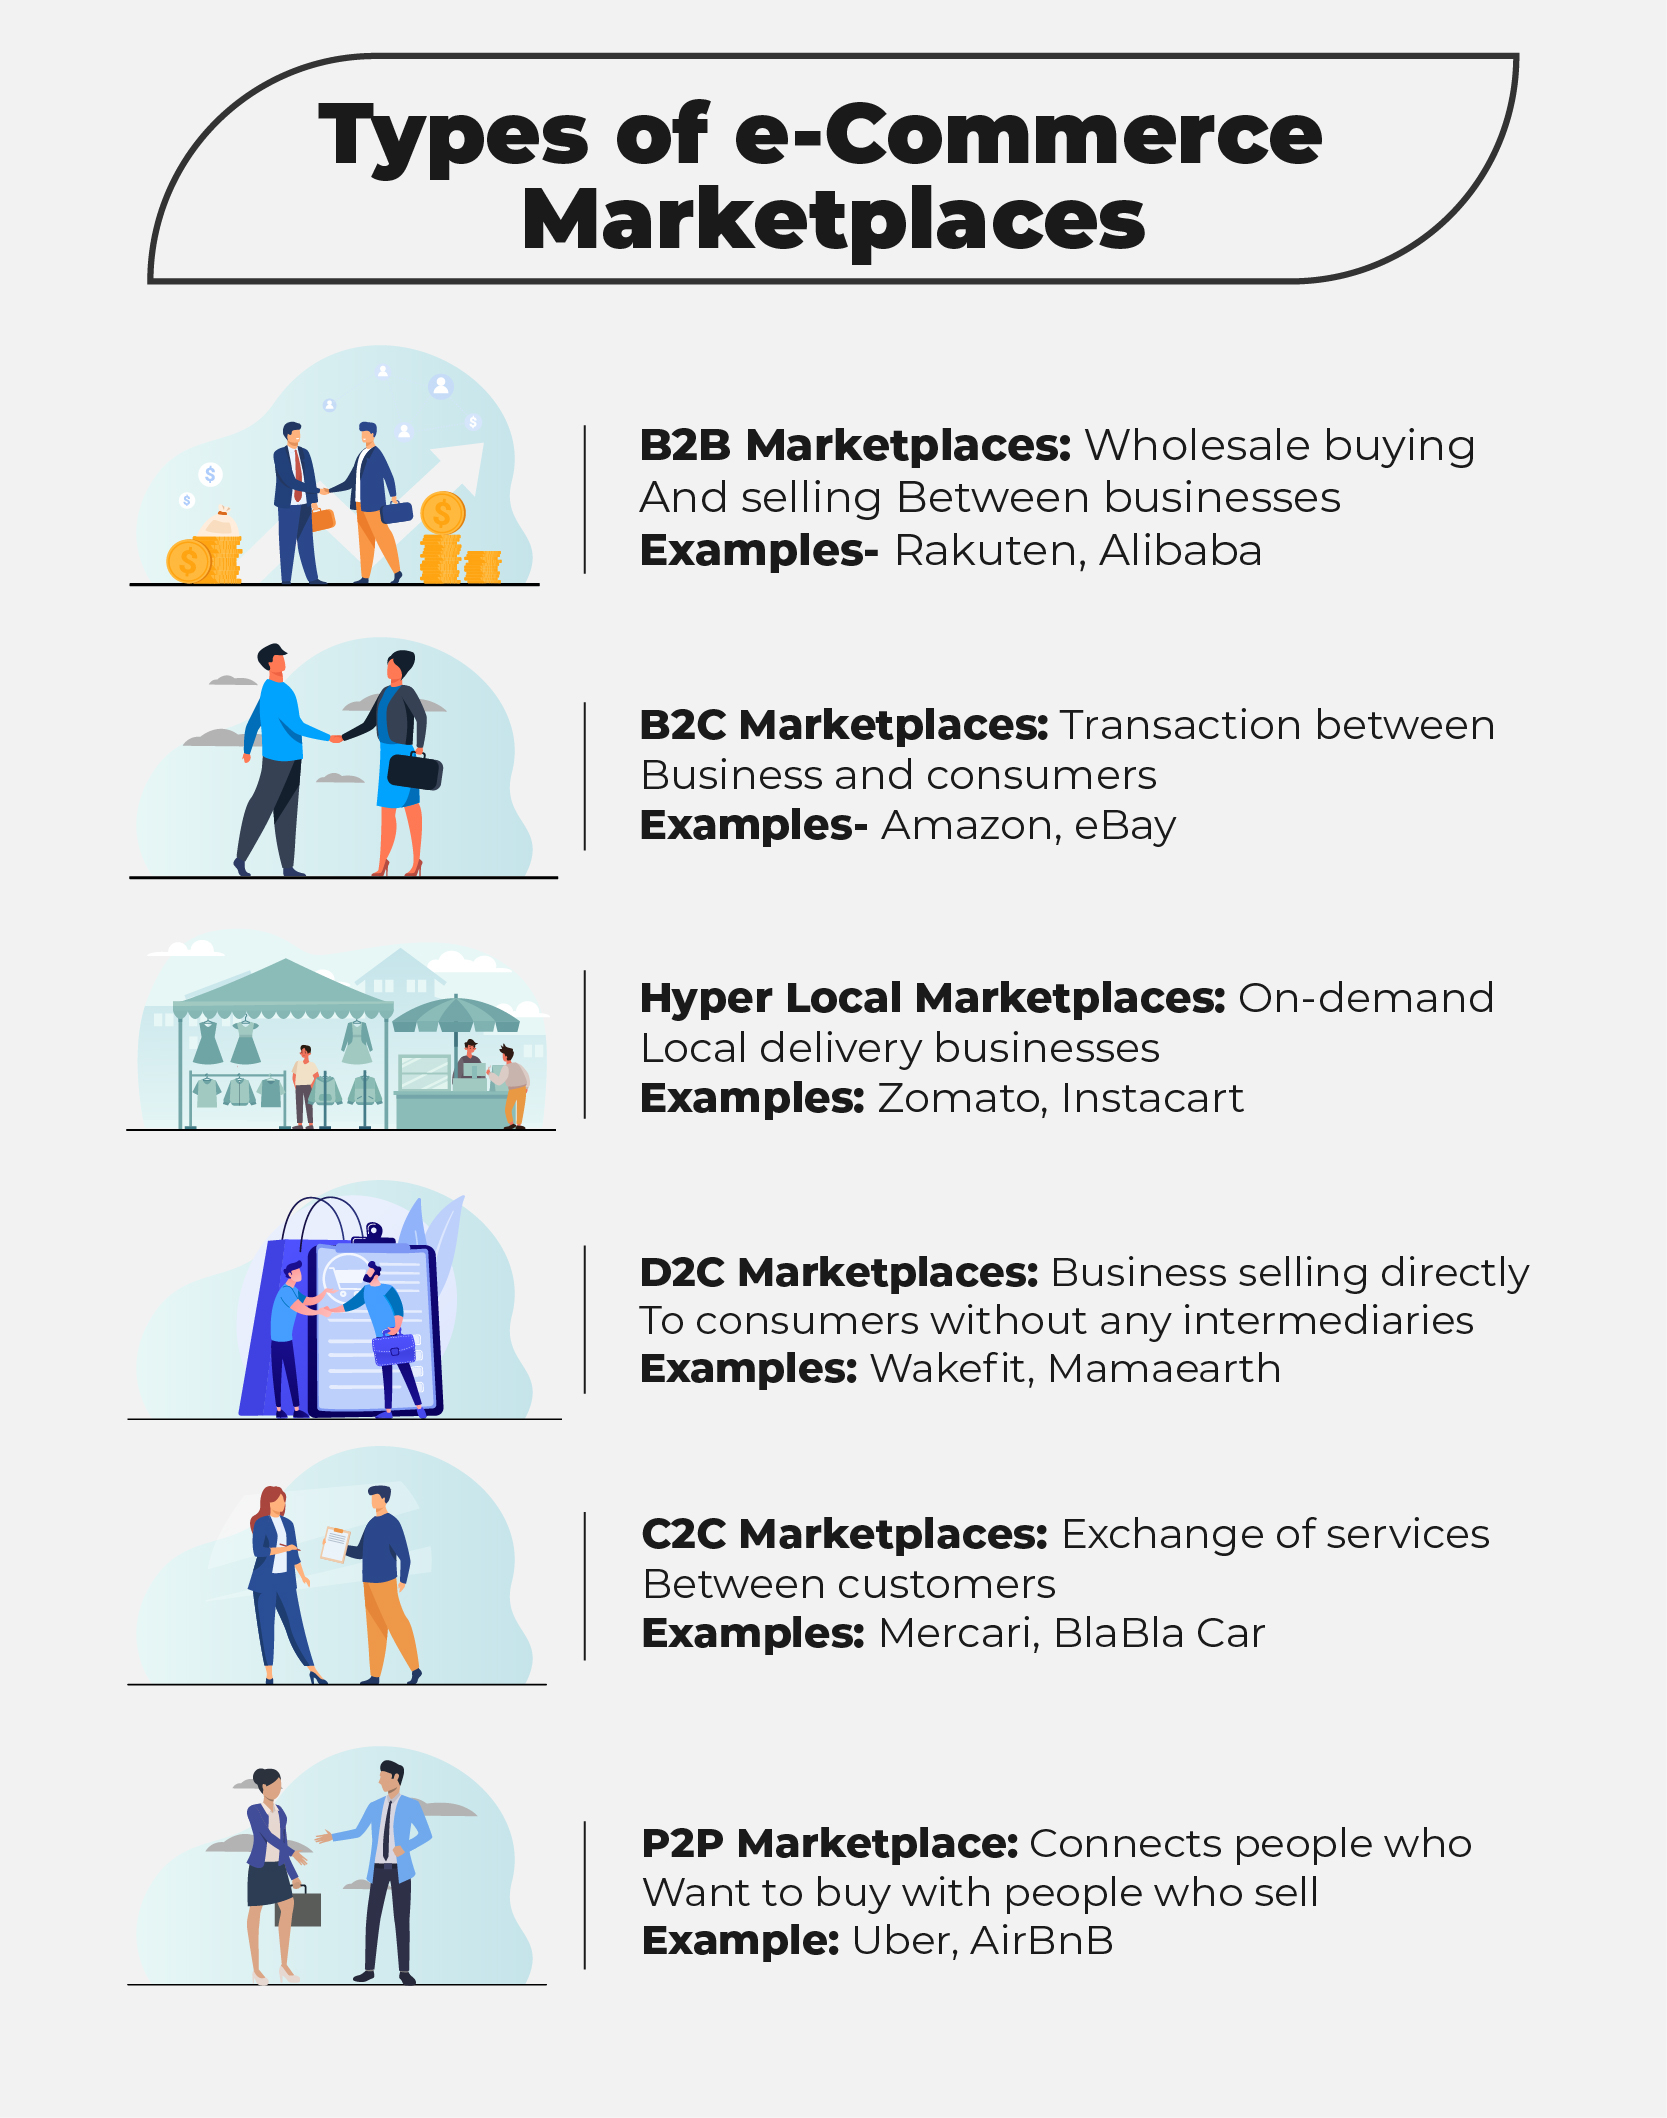 Types of online marketplace